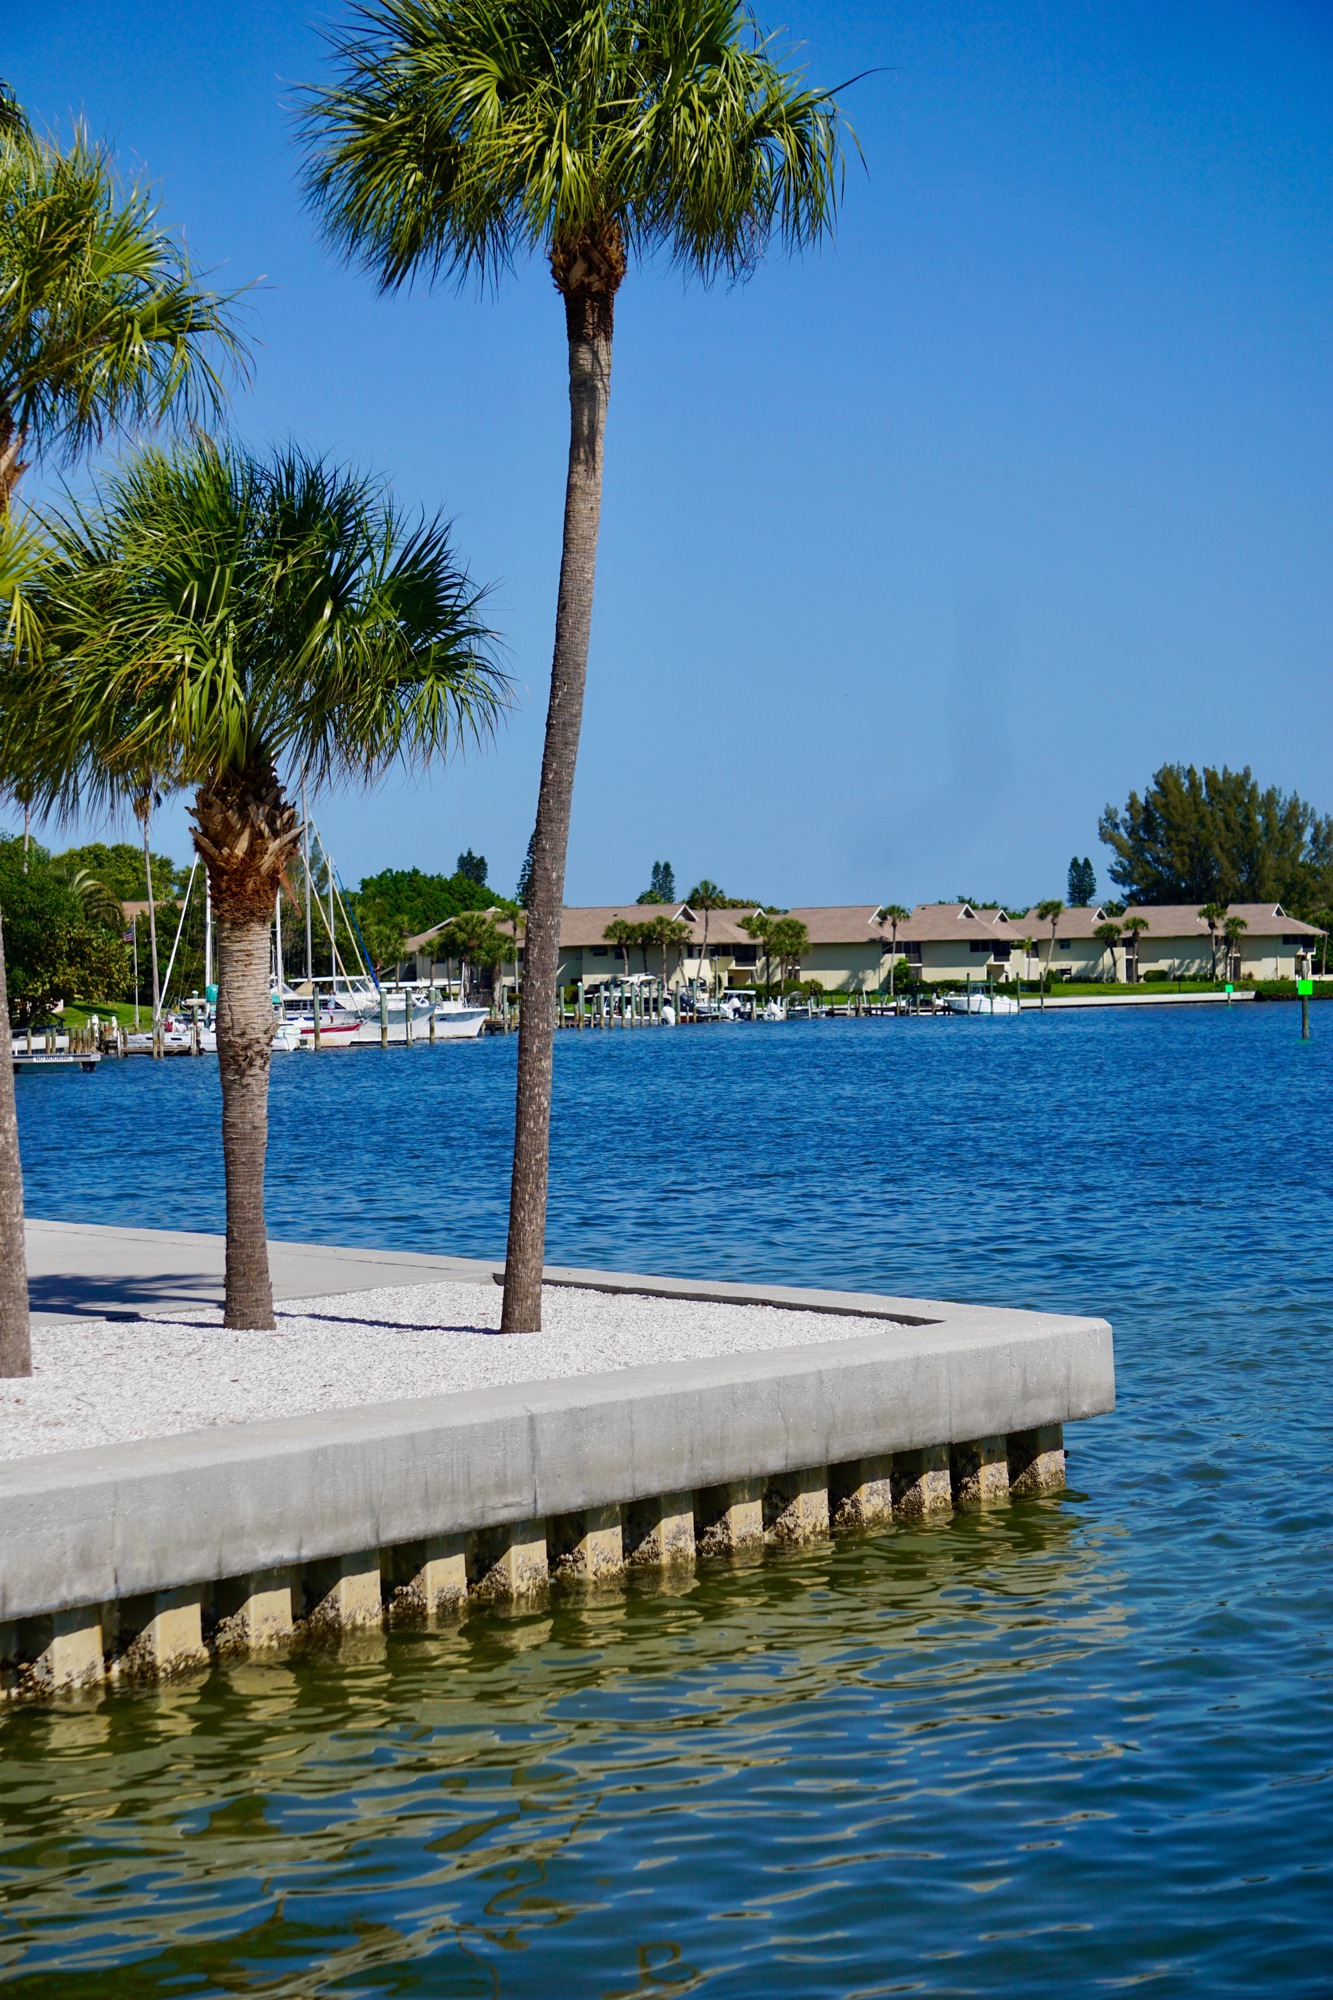 For now, commissioners decided to forego enhancing the seawall at Bayfront Park. There was also consideration of conducting a living shoreline study with the Florida Fish and Wildlife Commission and the Sarasota Bay Estuary Program.